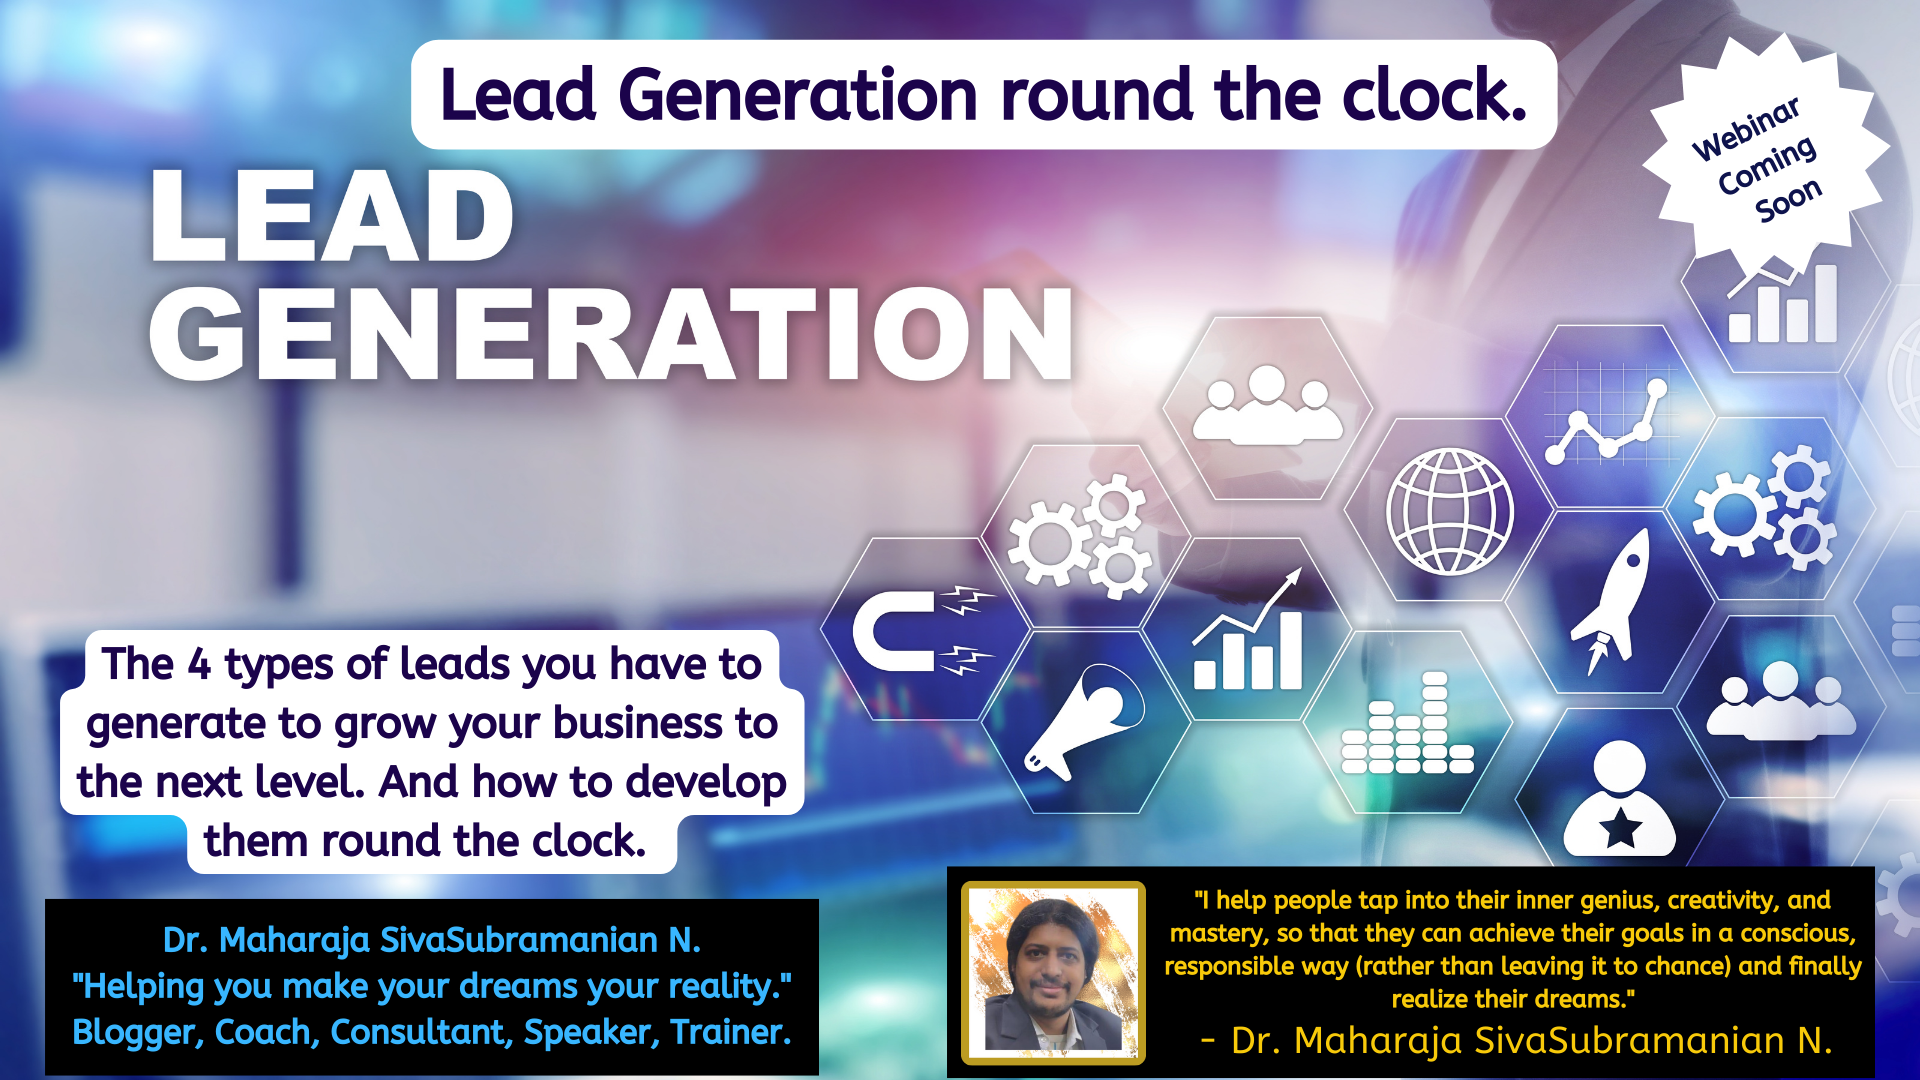 Lead Generation round the clock for B2B companies. – Upcoming free webinar.